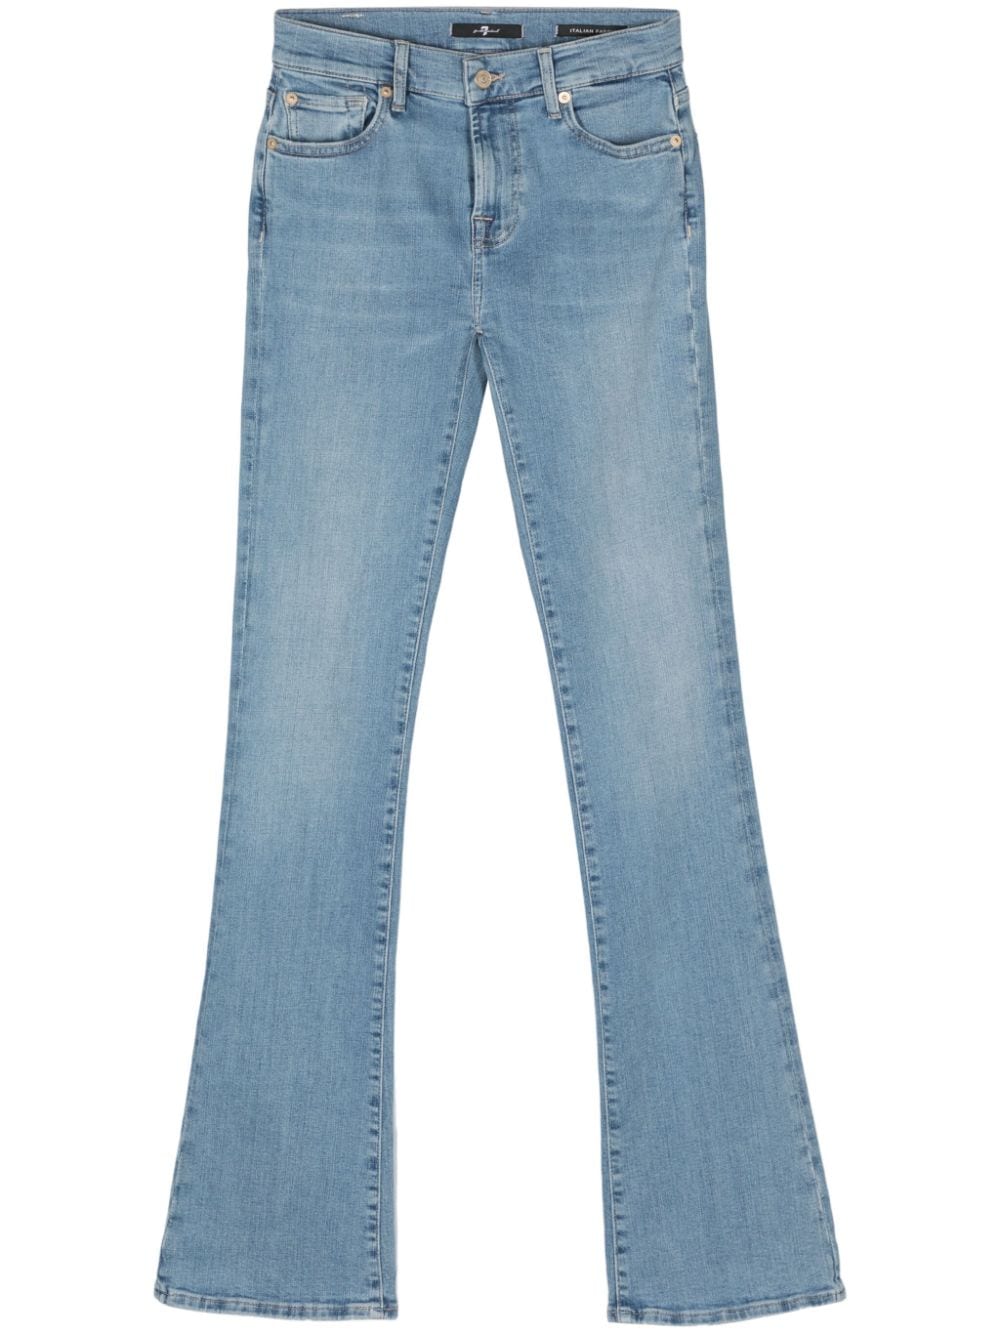 7 For All Mankind Slim Illusion bootcut cotton jeans - Blue von 7 For All Mankind